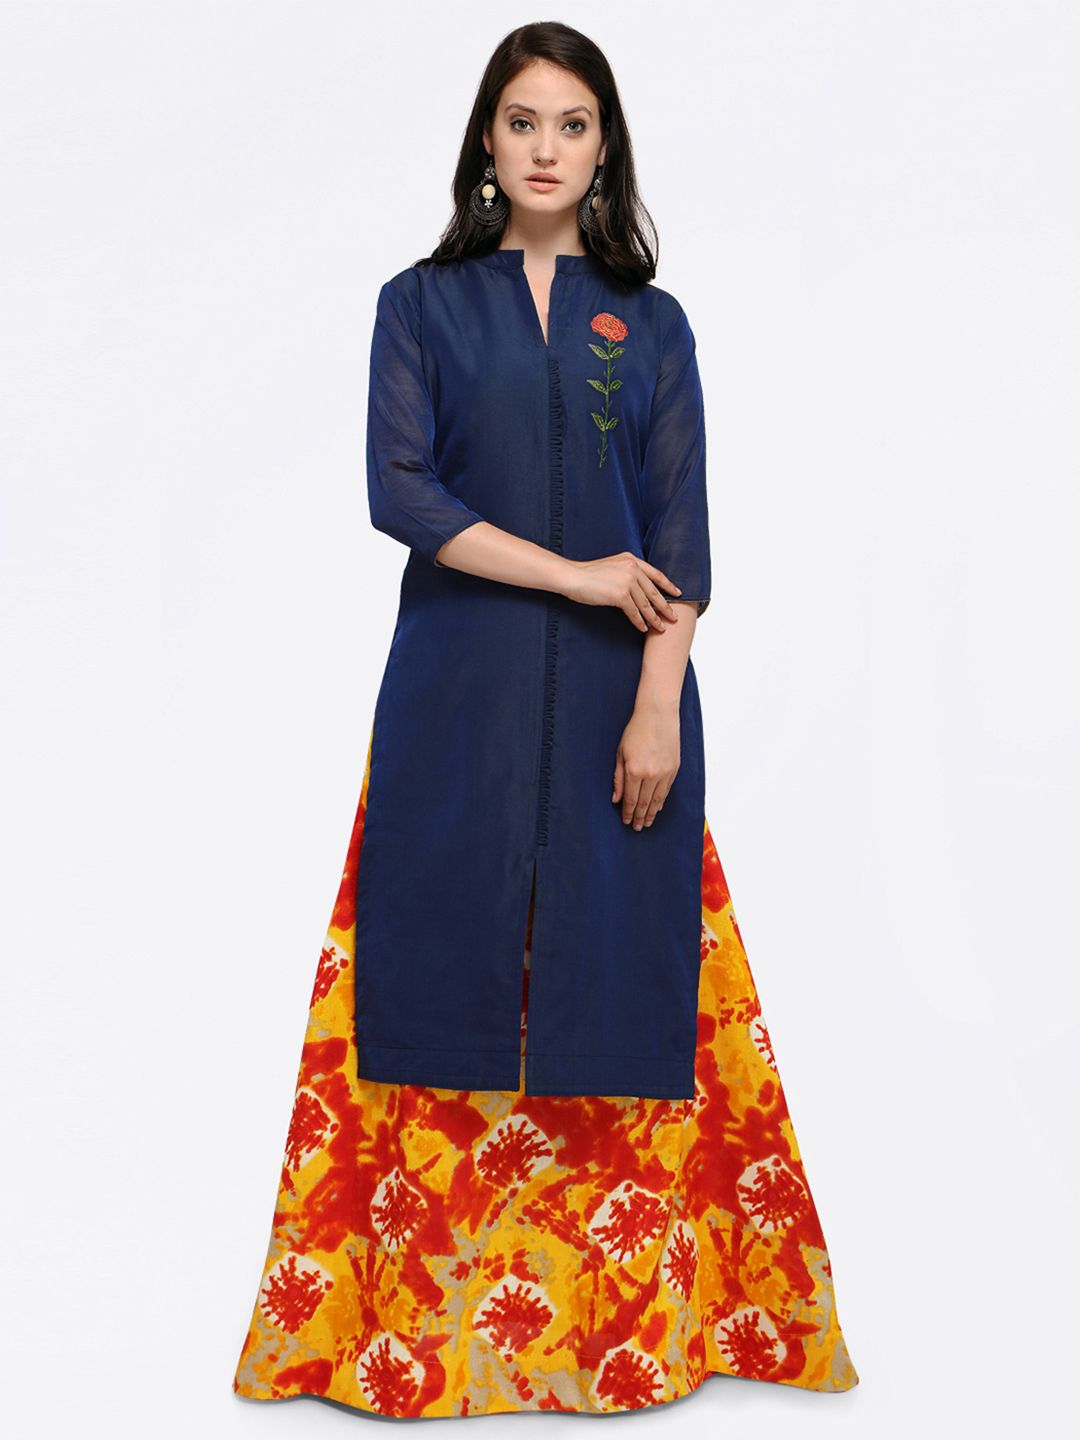 Saree mall Navy Blue & Orange Cotton Blend Semi-Stitched Dress Material Price in India